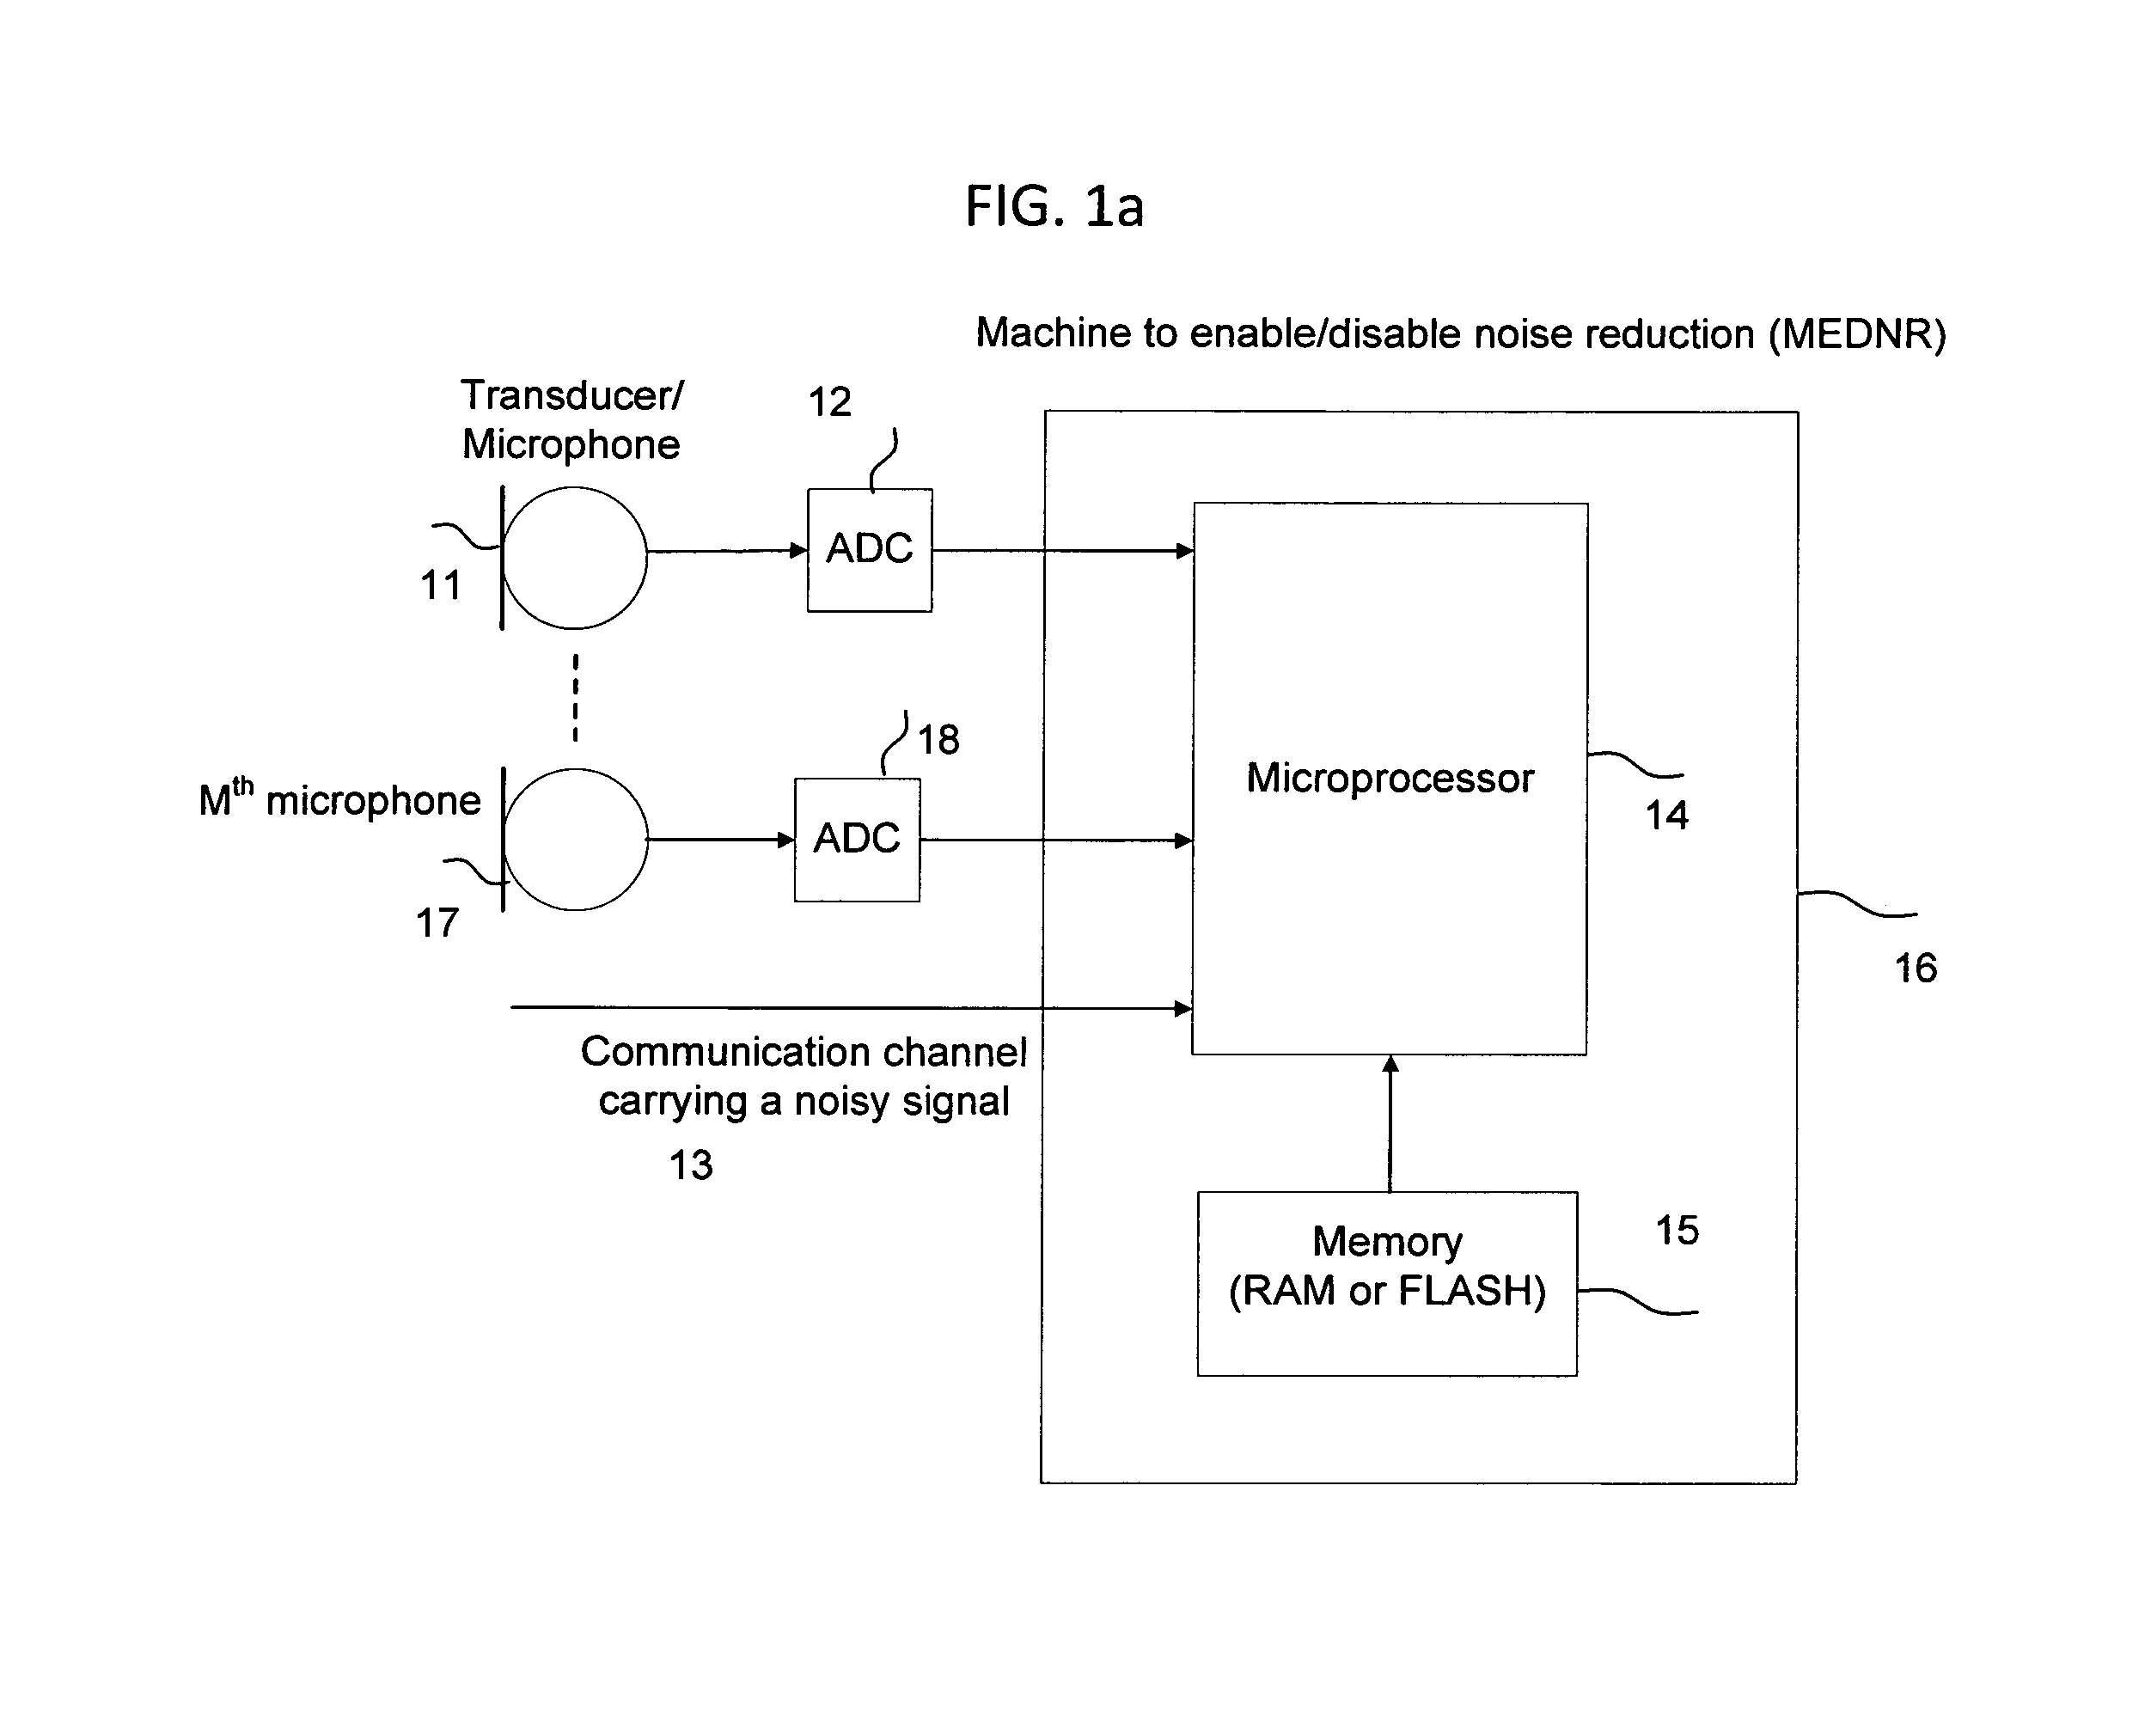 Machine for enabling and disabling noise reduction (MEDNR) based on a threshold